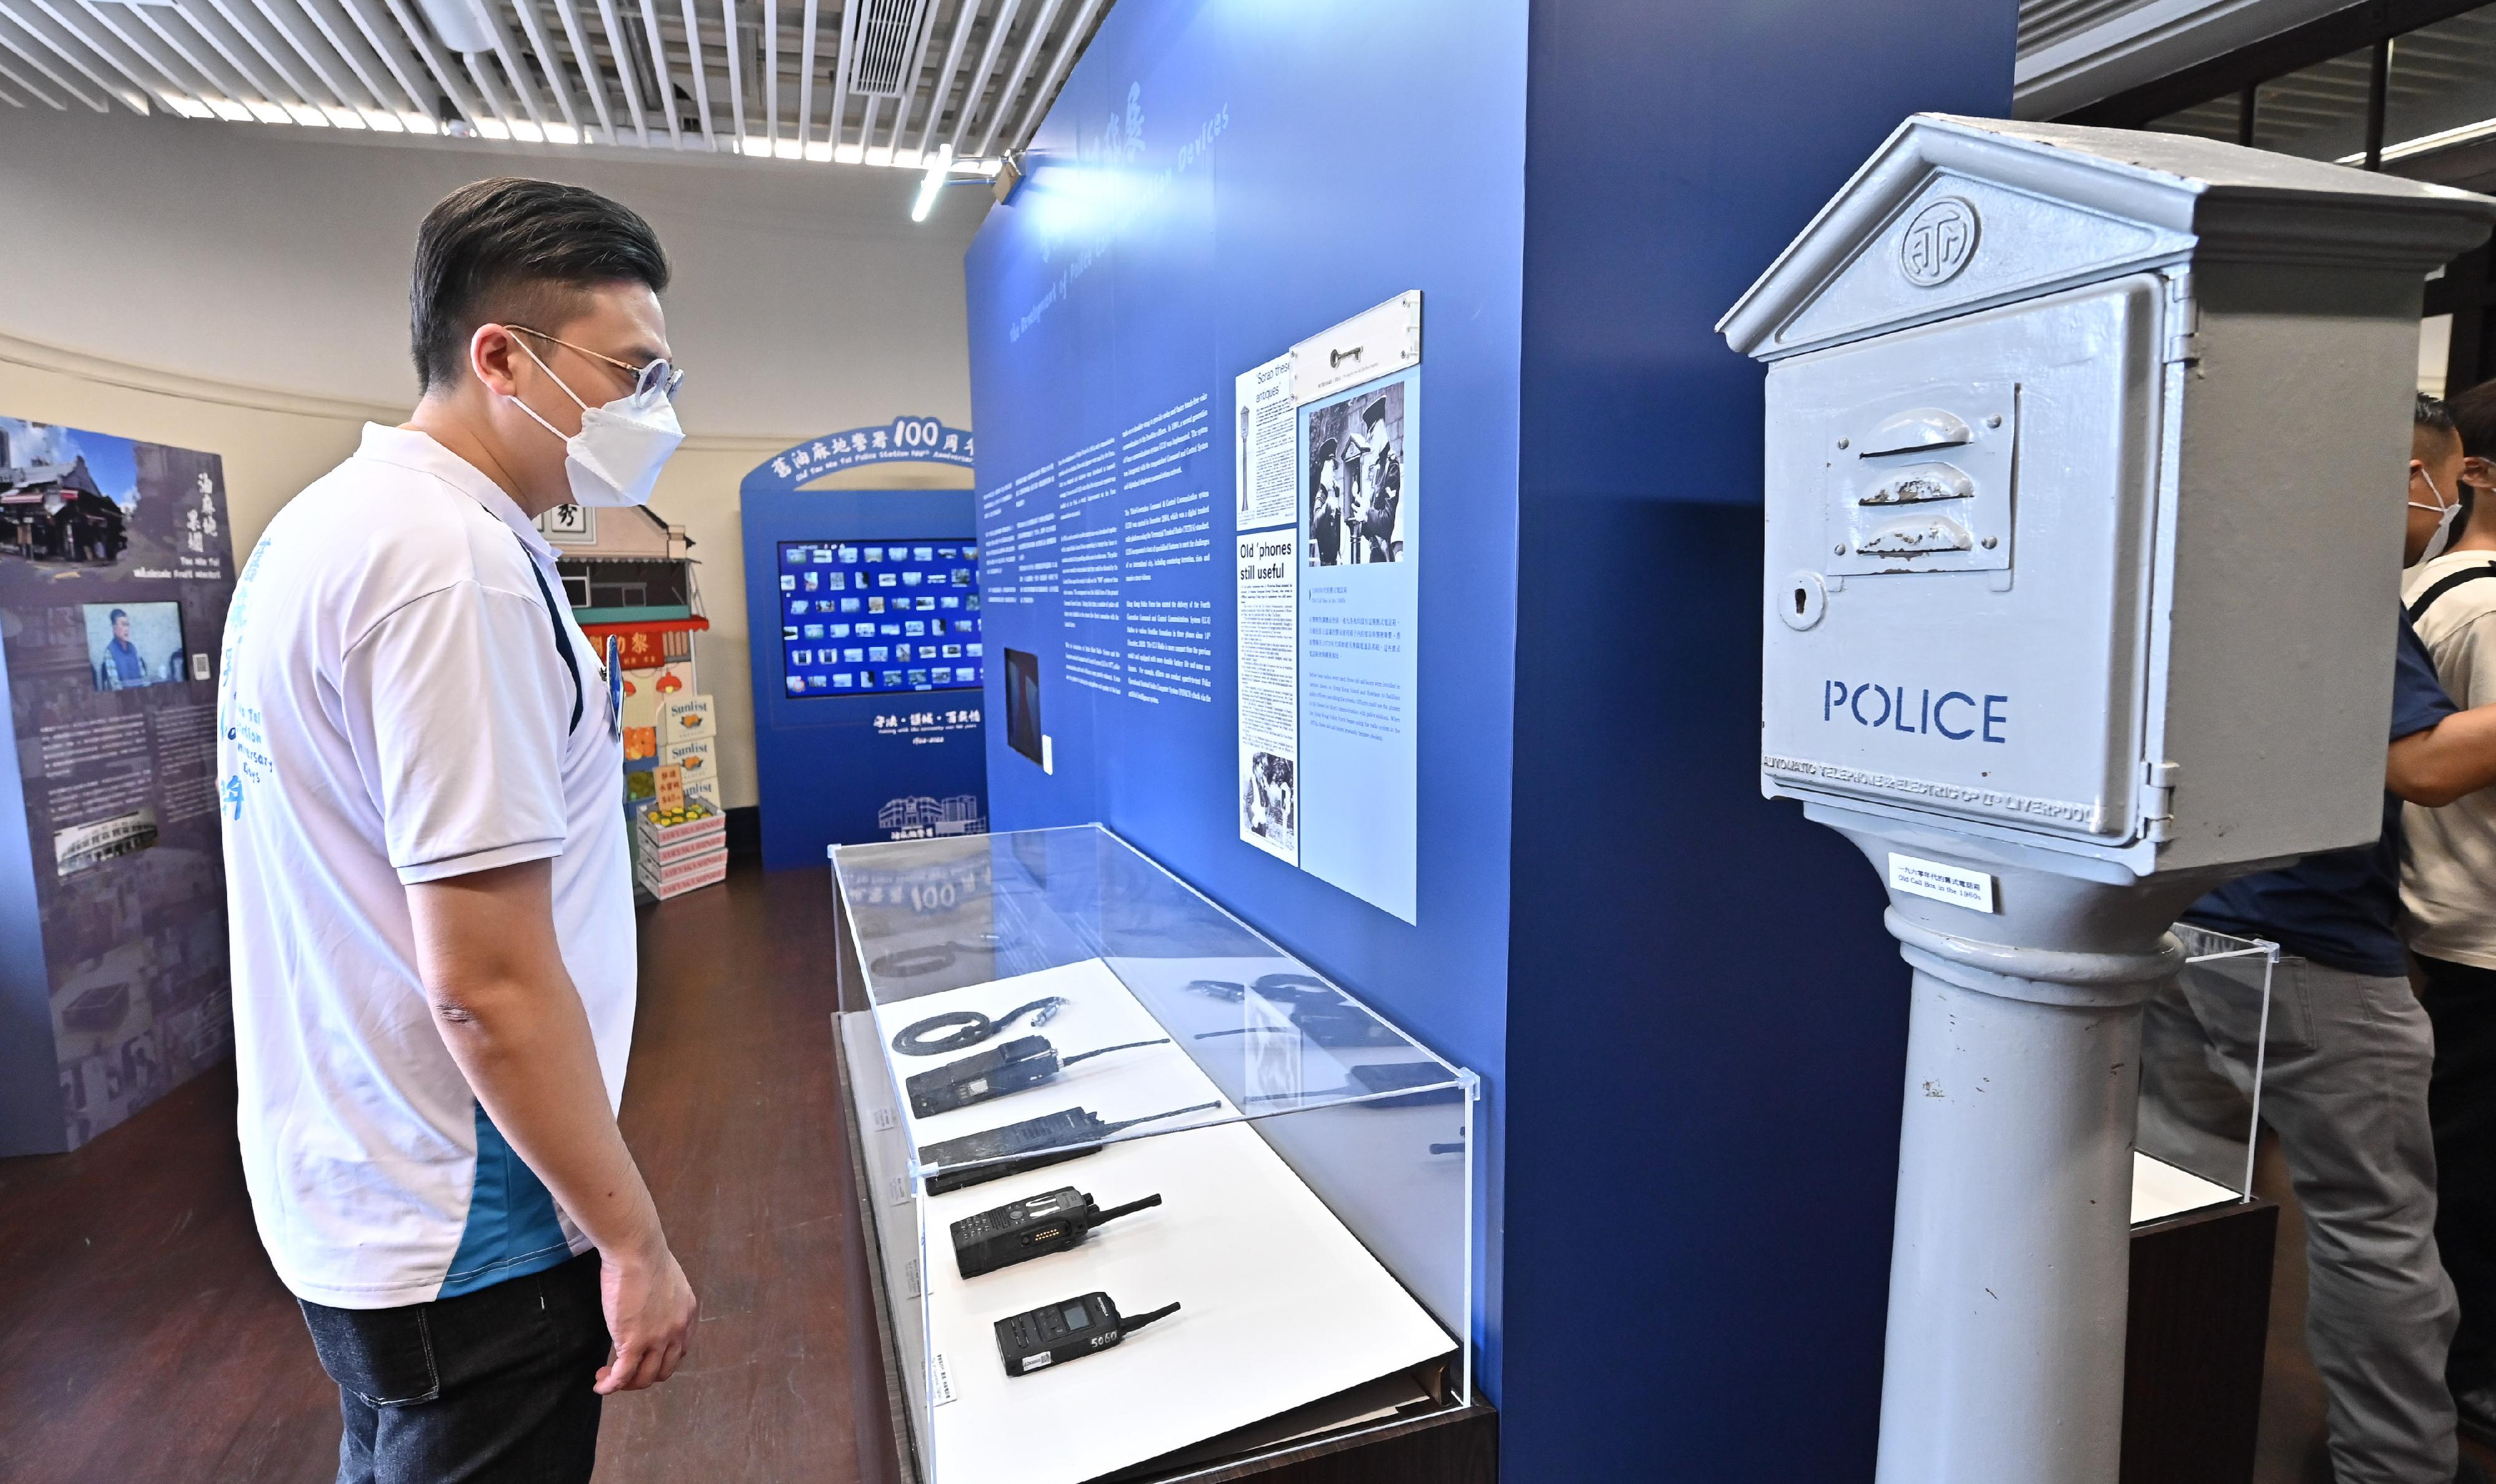 The “Old Yau Ma Tei Police Station 100th Anniversary Open Days” organised by The Hong Kong Police Force kicks off today (August 6). Photo shows a visitor touring the display of Police communication equipment to learn its development over the years.